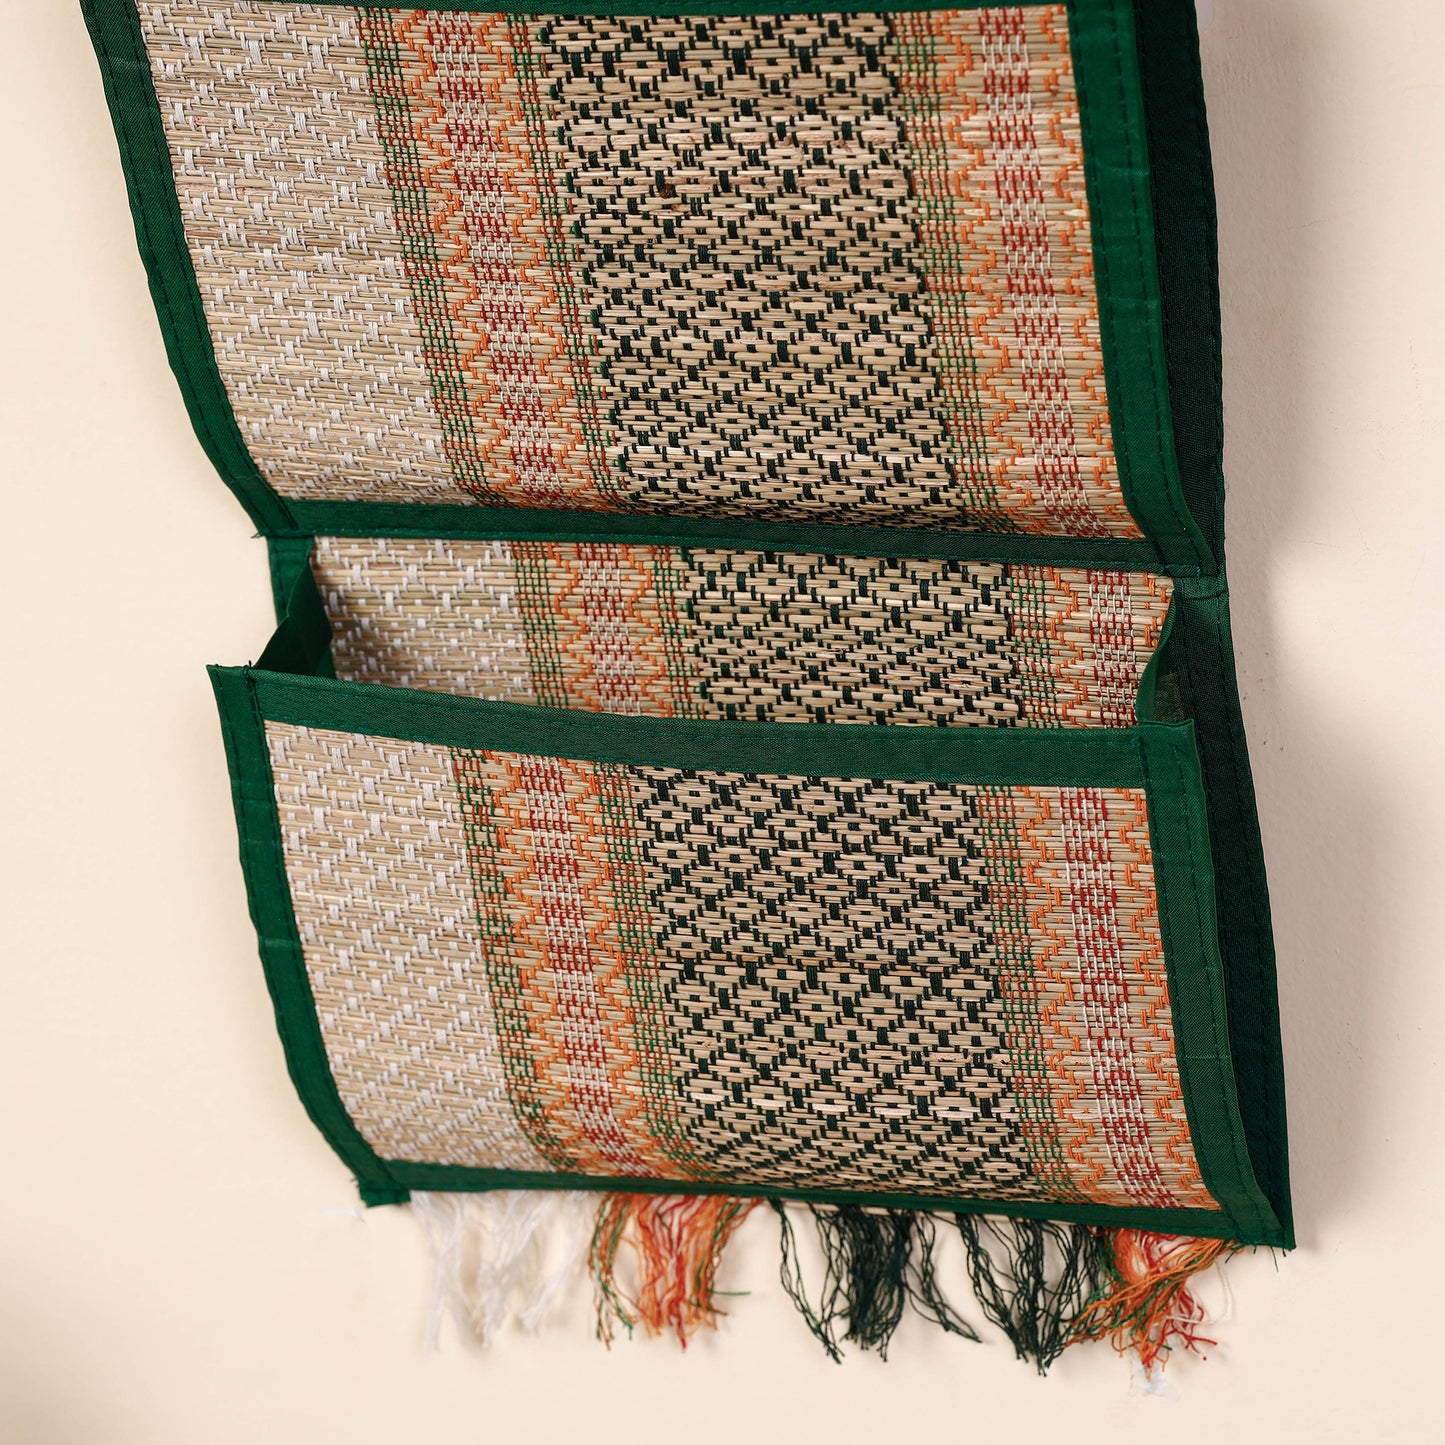 Madur Grass Handwoven Wall Hanging Letter Holder of Midnapore - 2 Pockets